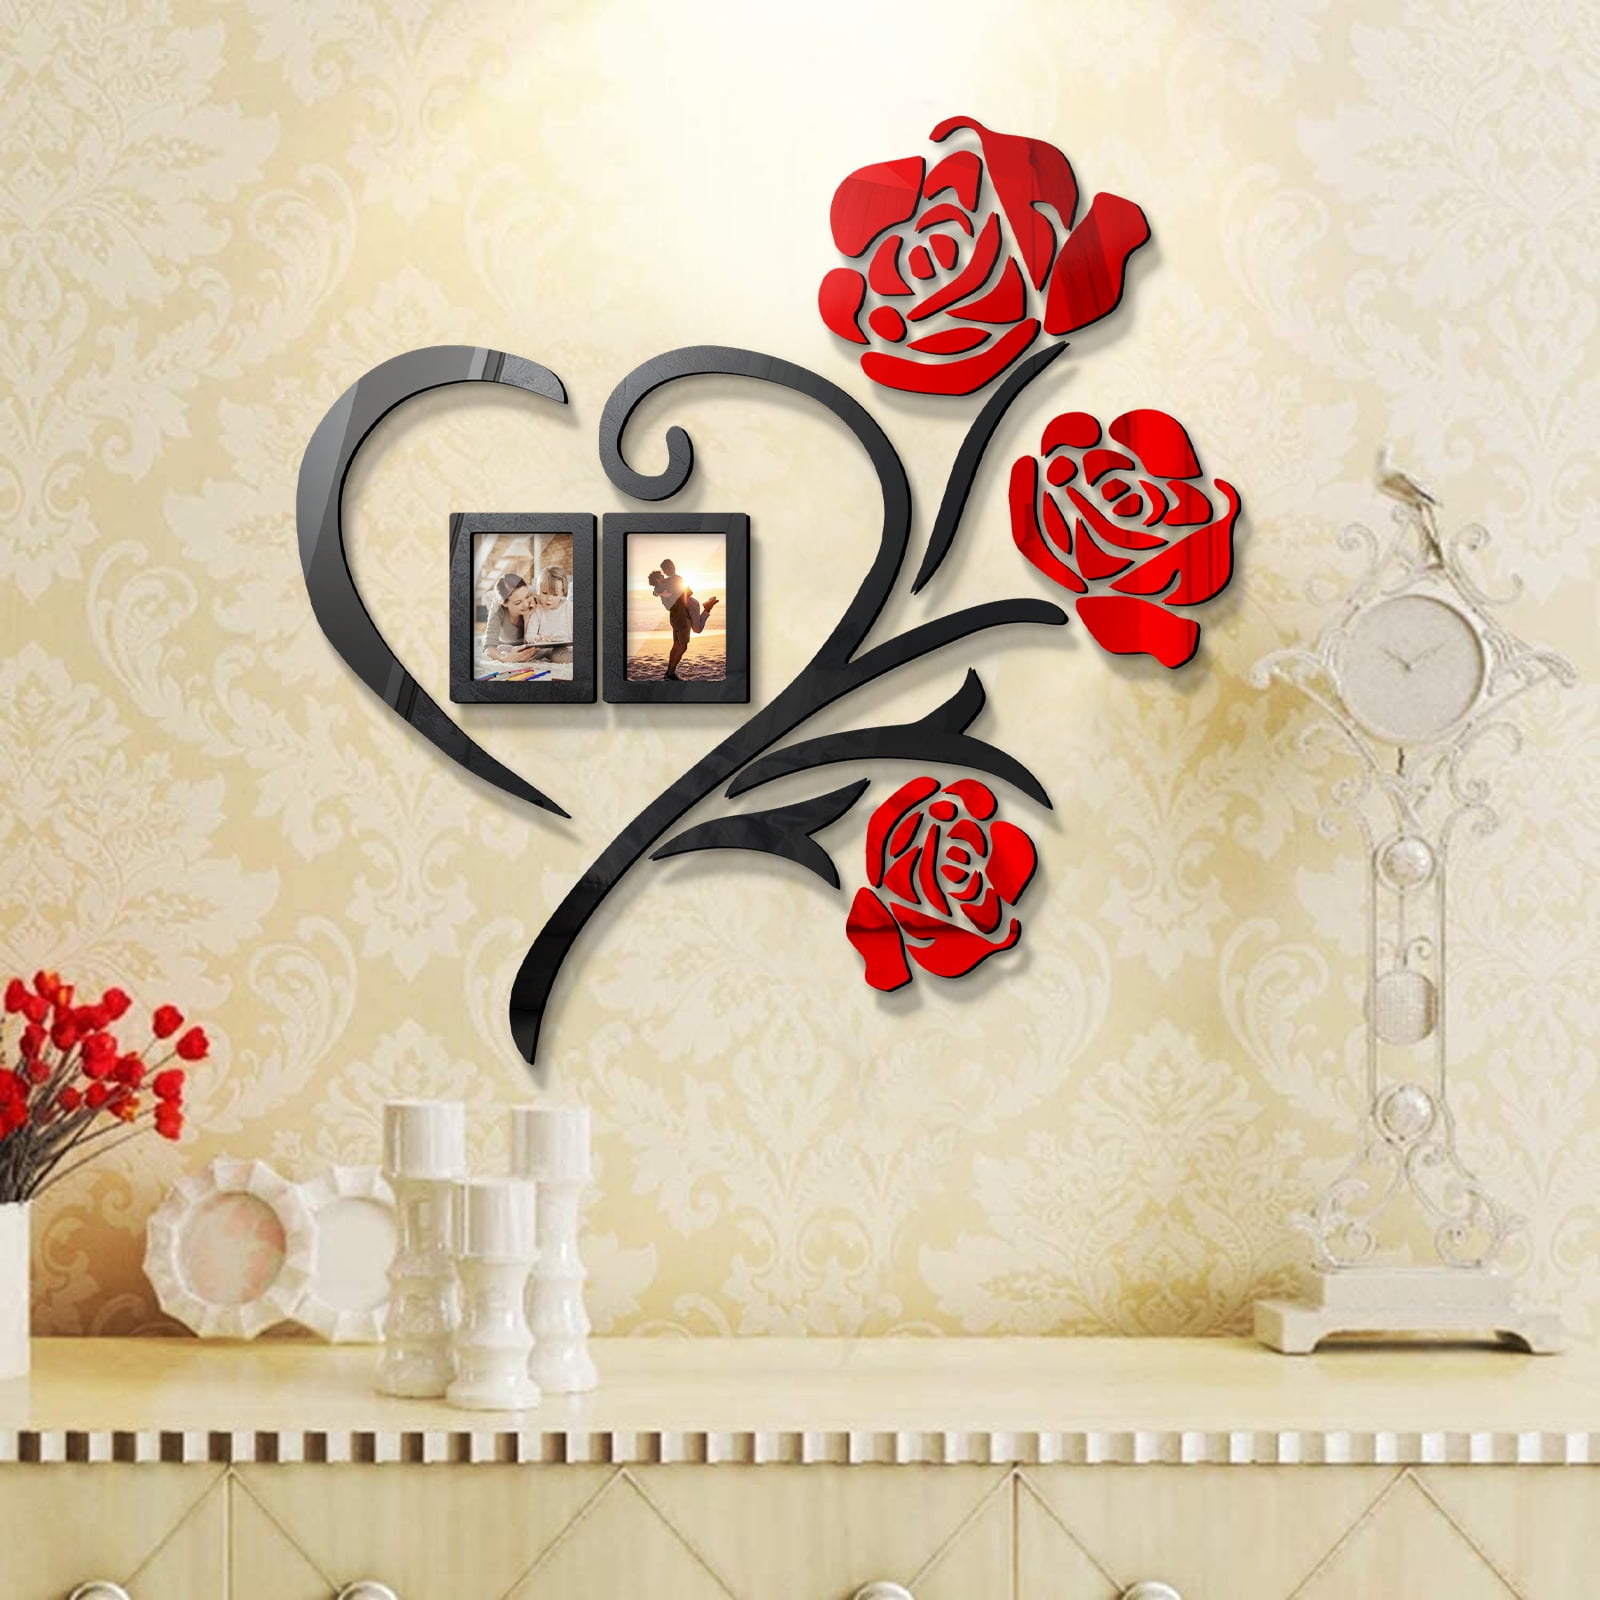 3D Lifelike Rose Flowers Wall Stickers DIY Removable Home Bedroom Decor Decals